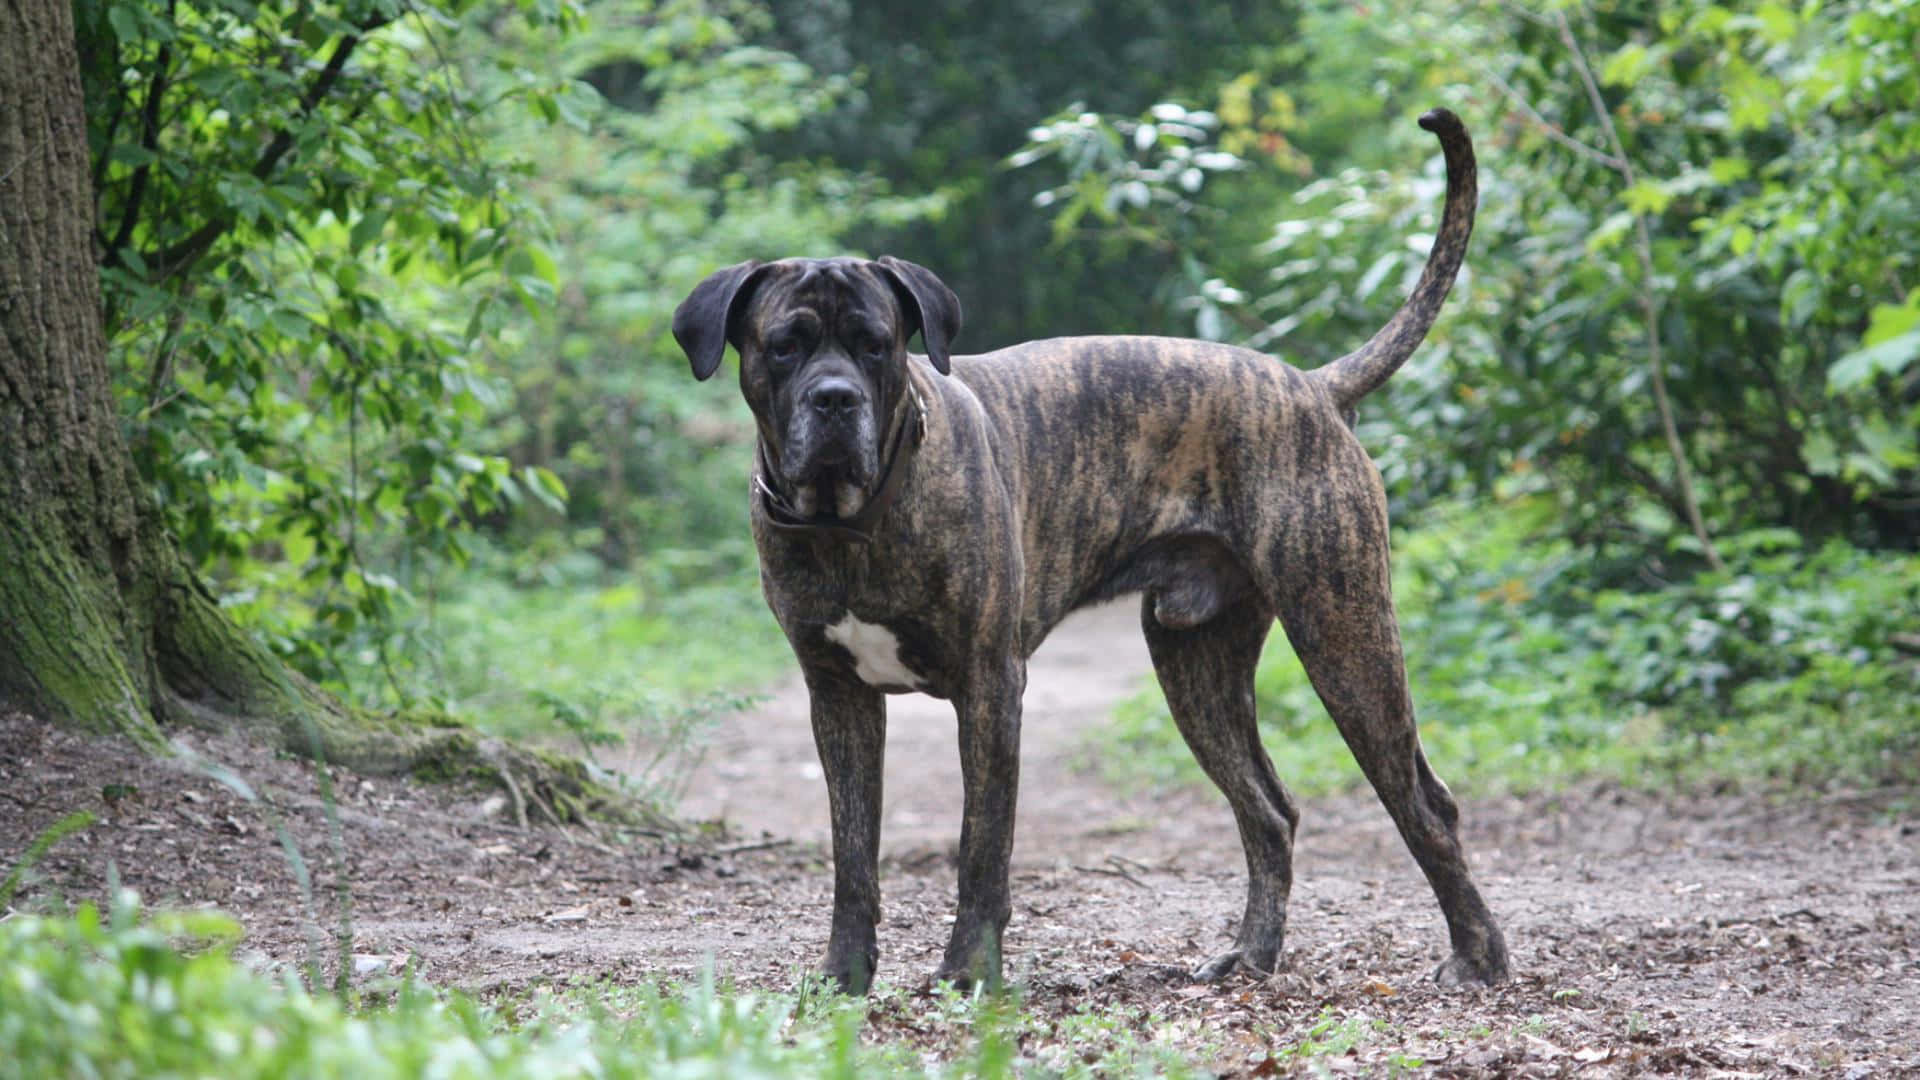 "A Big Softy: This Handsome Cane Corso Is Ready for Furry snuggles Anytime"